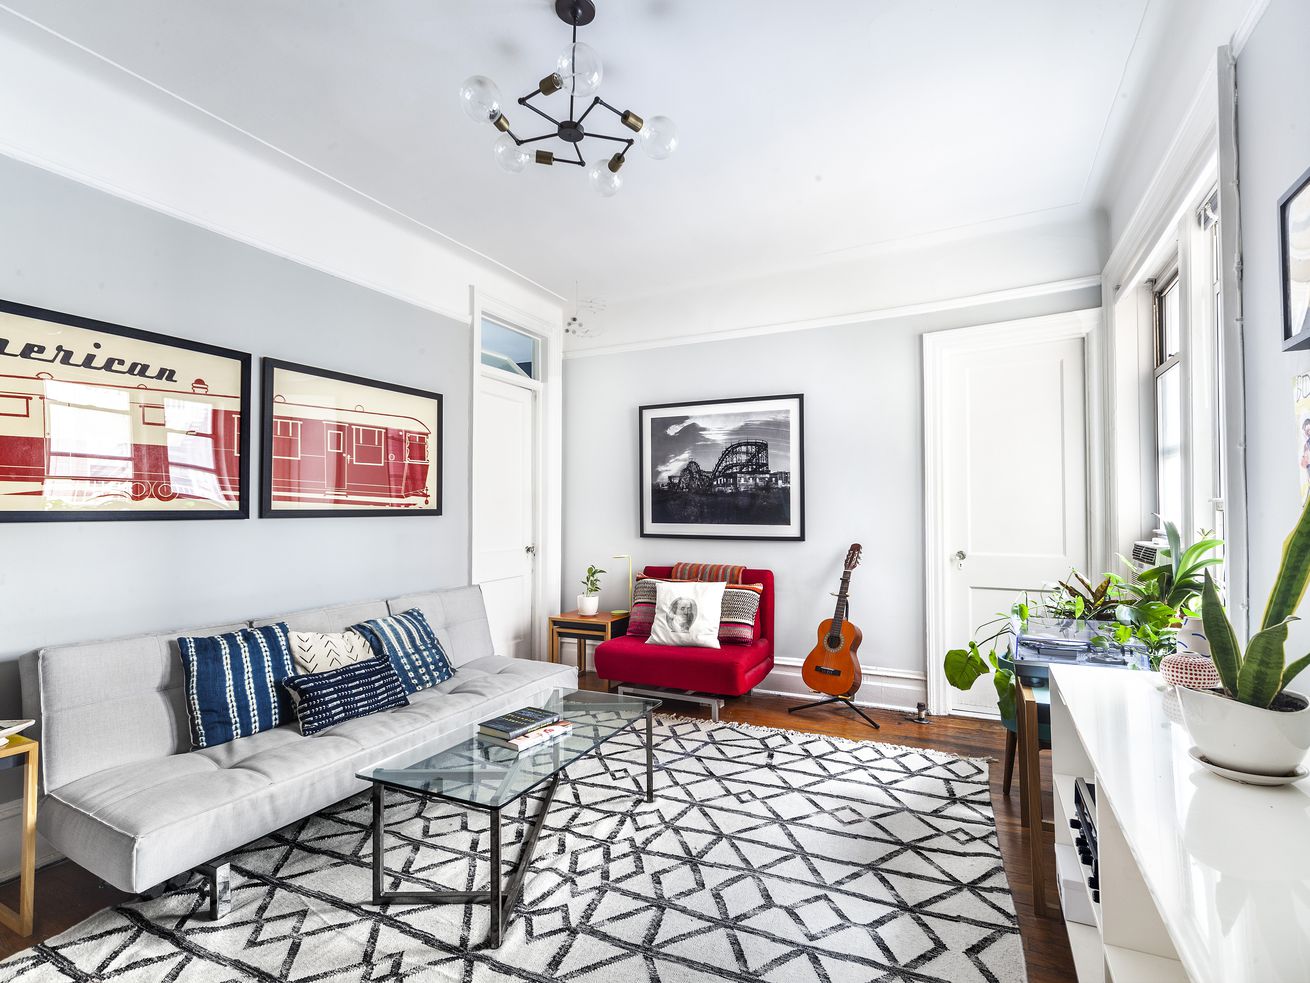 A living area inside a Brooklyn Heights apartment with hardwood floors, a light grey couch, a glass coffee table, grey walls, and base moldings.